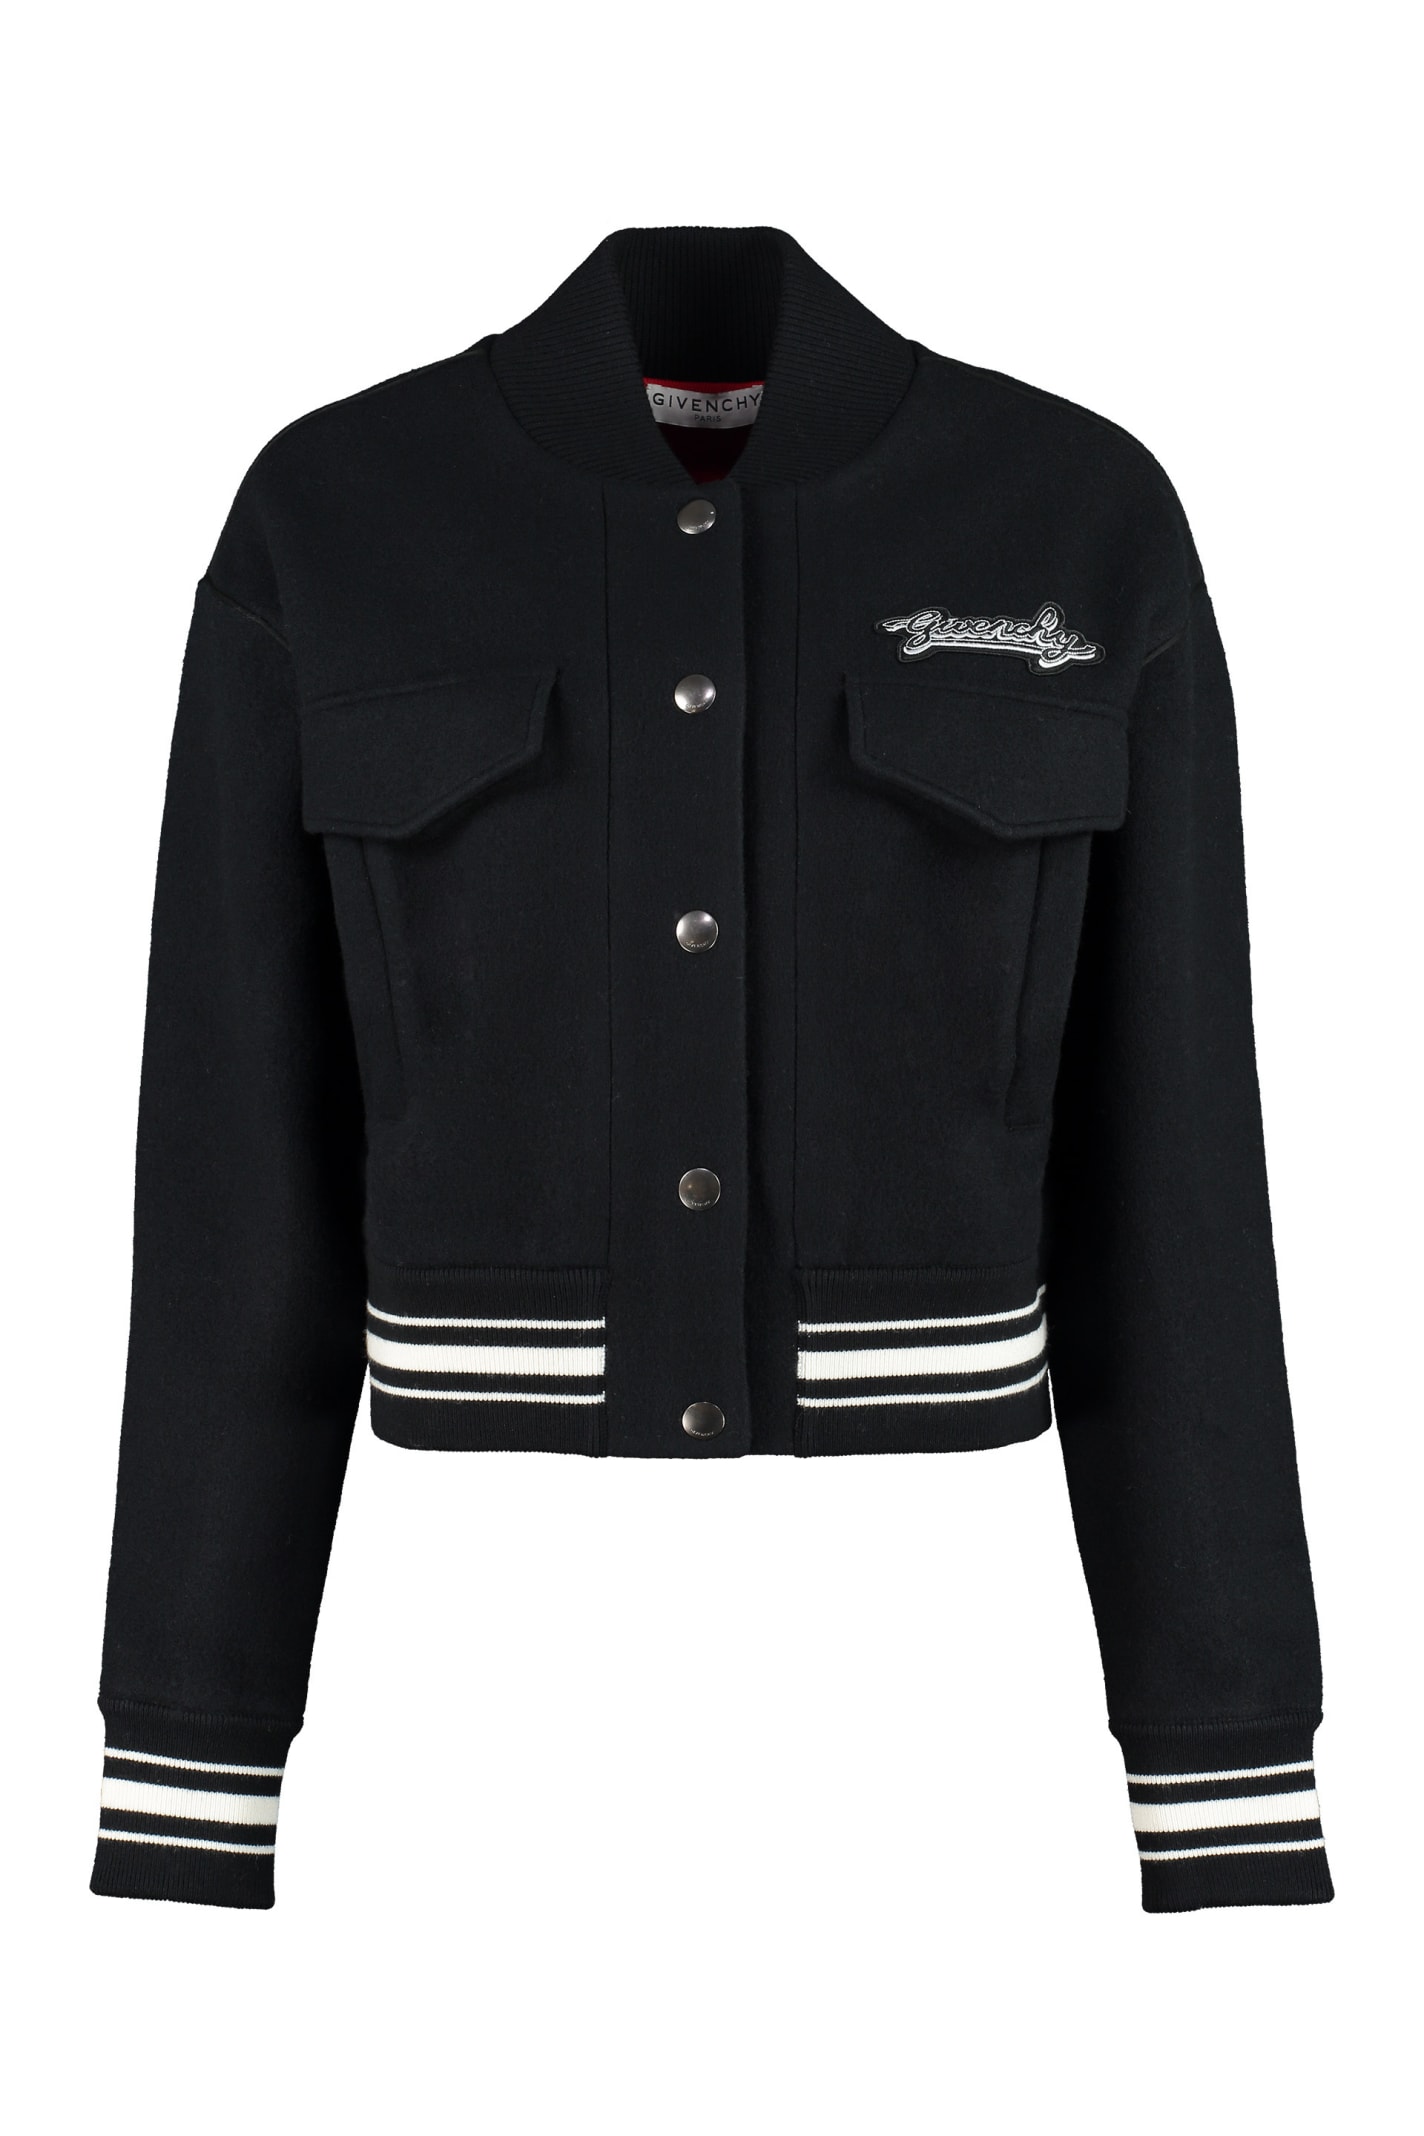 Givenchy Embroidered Wool Bomber Jacket